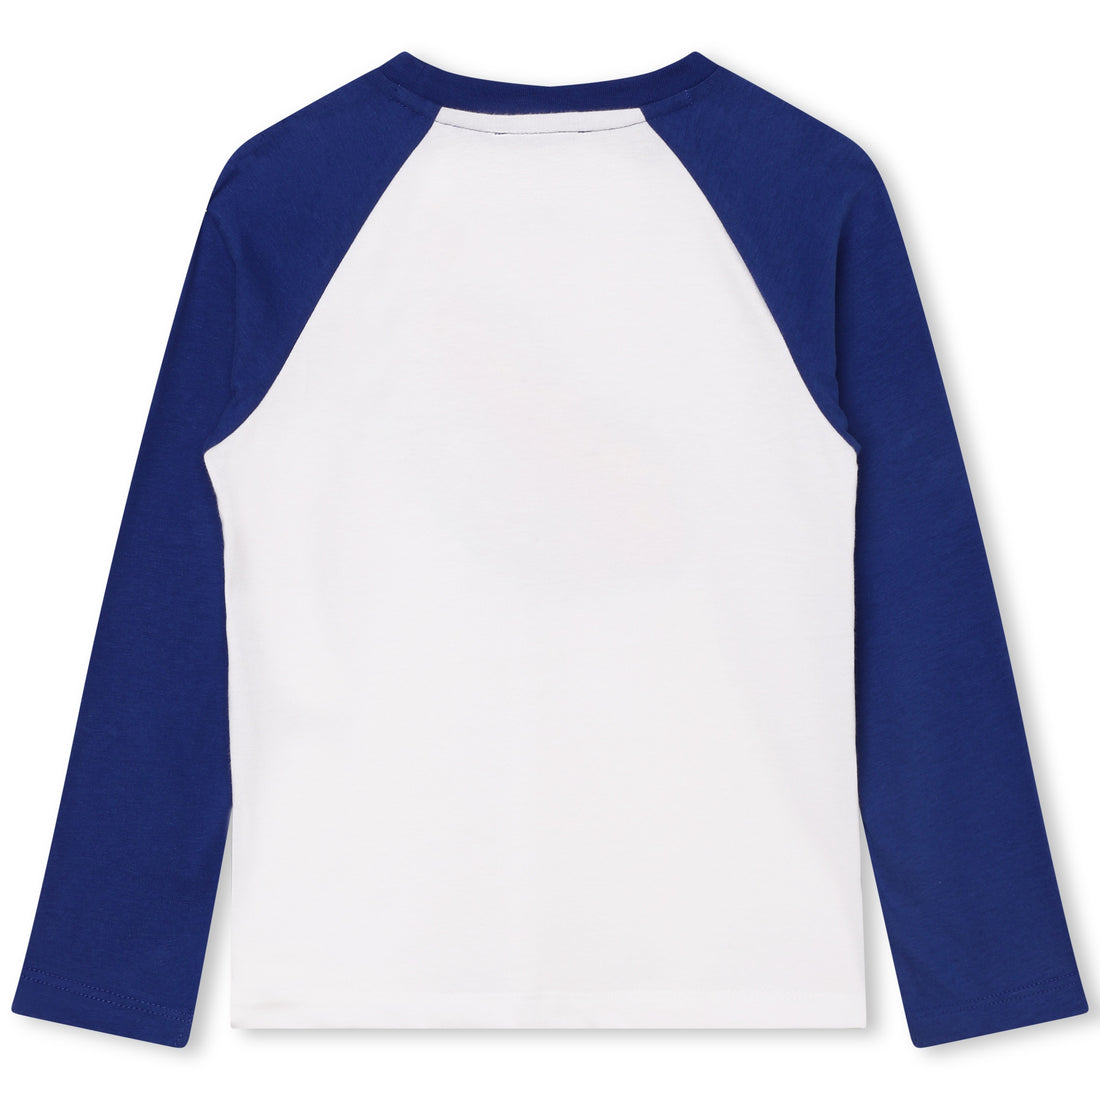 The Marc Jacobs Long Sleeve T-Shirt Style: W25605